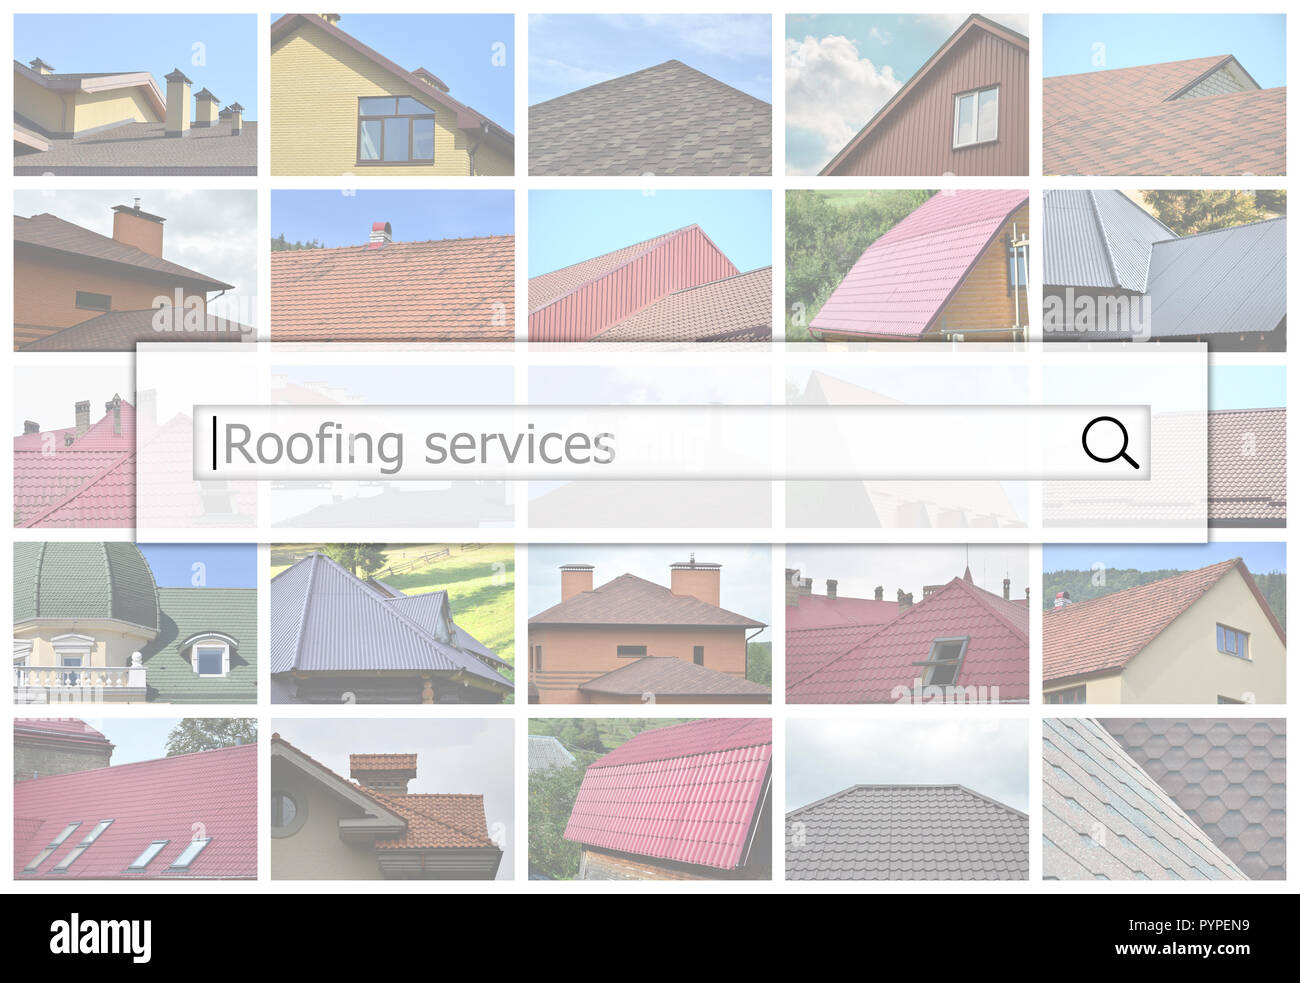 gg roofing inc
Roofing